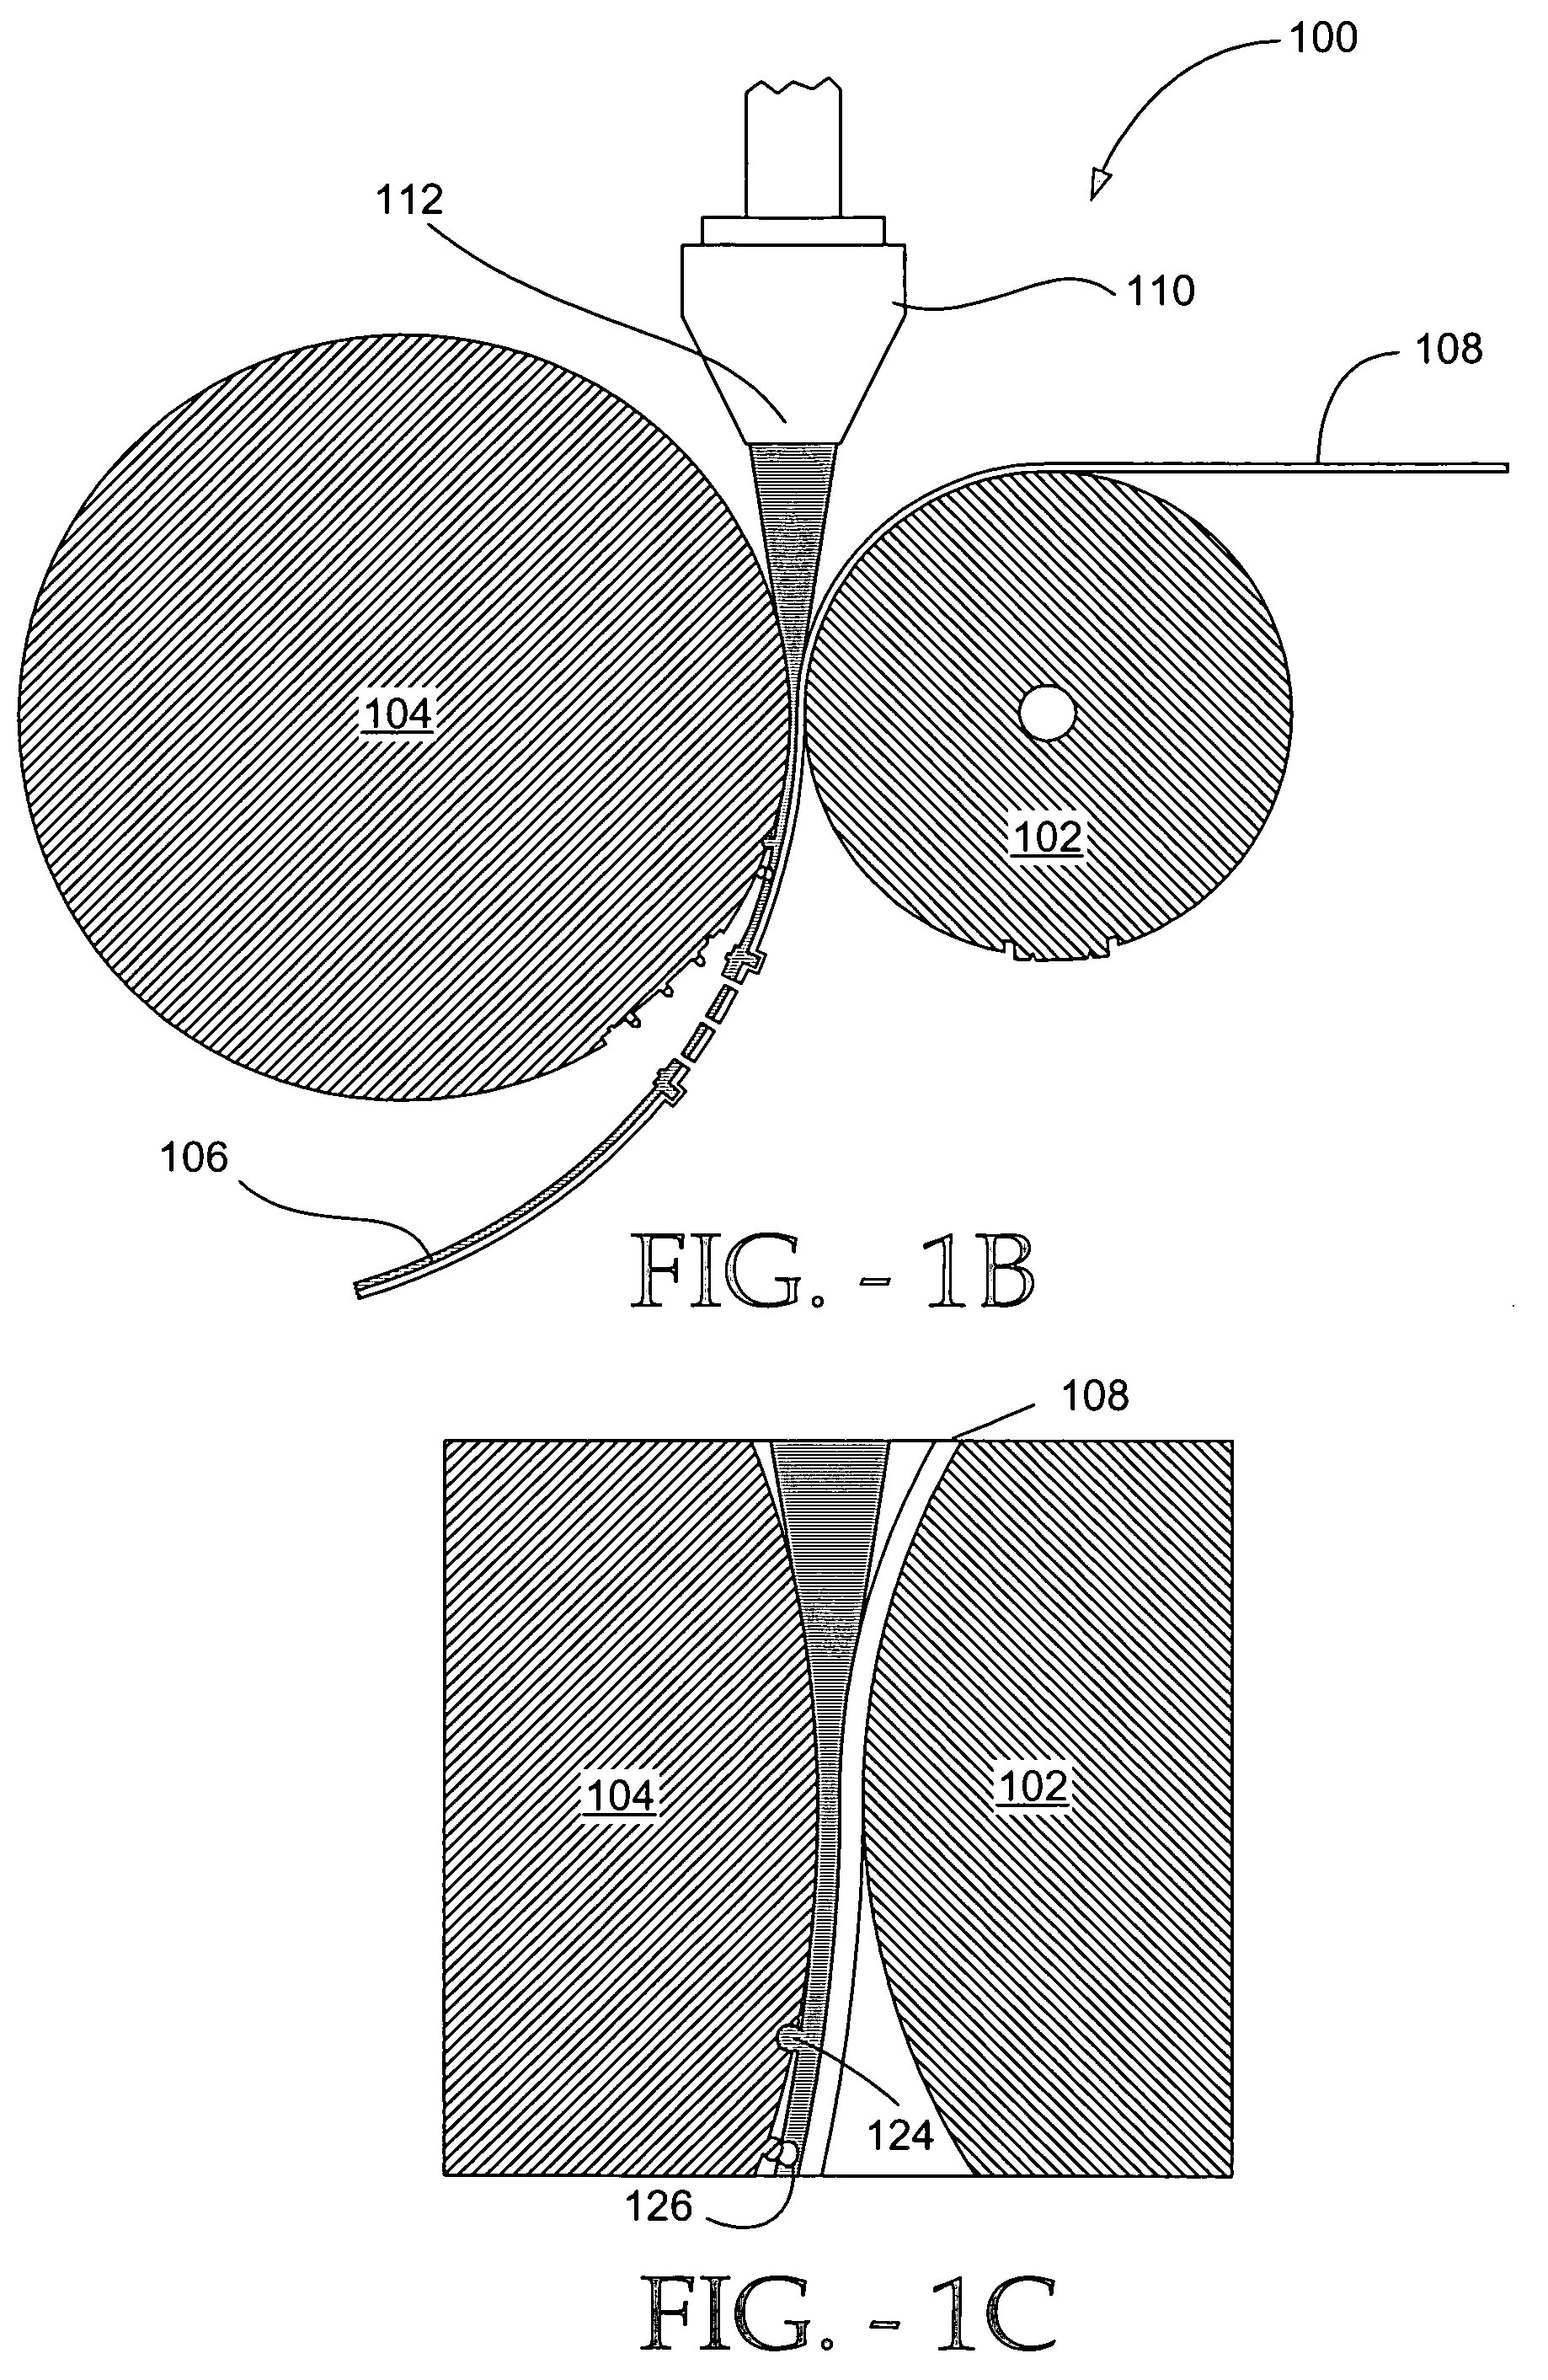 Method for manufacturing a sealable bag having an integrated zipper for use in vacuum packaging